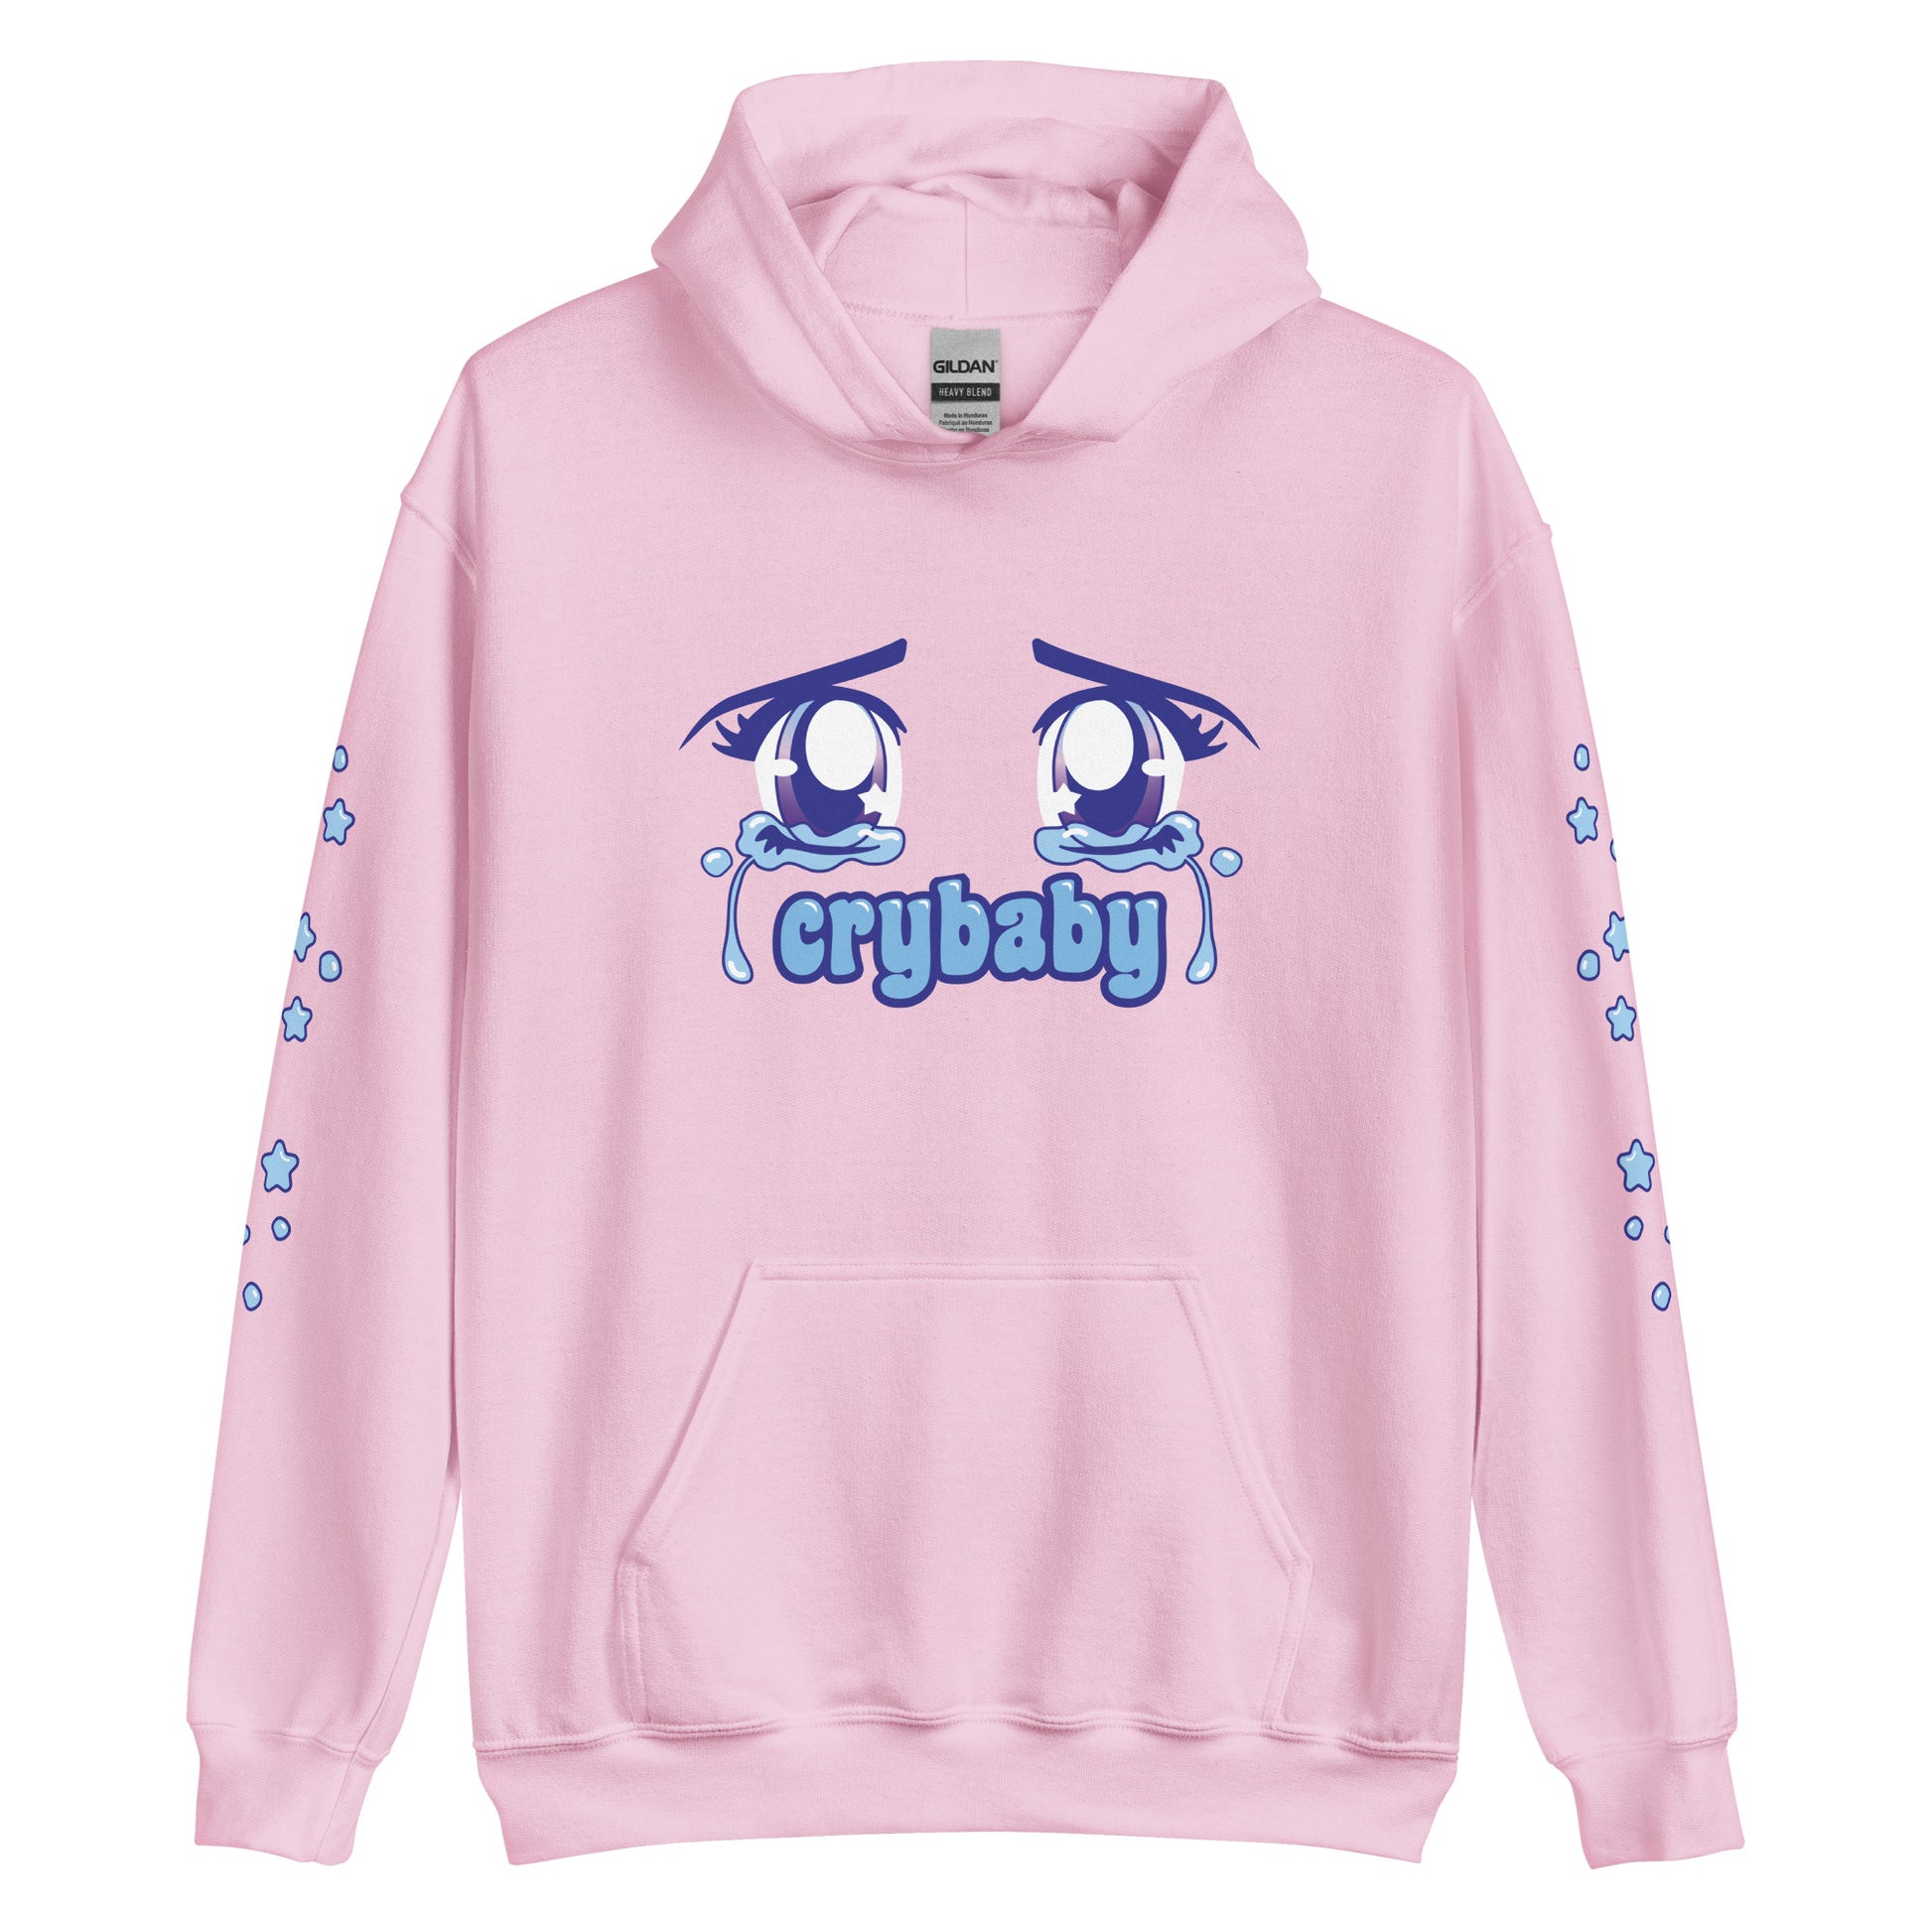 A light pink hooded sweatshirt featuring an image of crying anime-style eyes. Text underneath the eyes reads "crybaby". Small teardrops and stars decorate each sleeve.